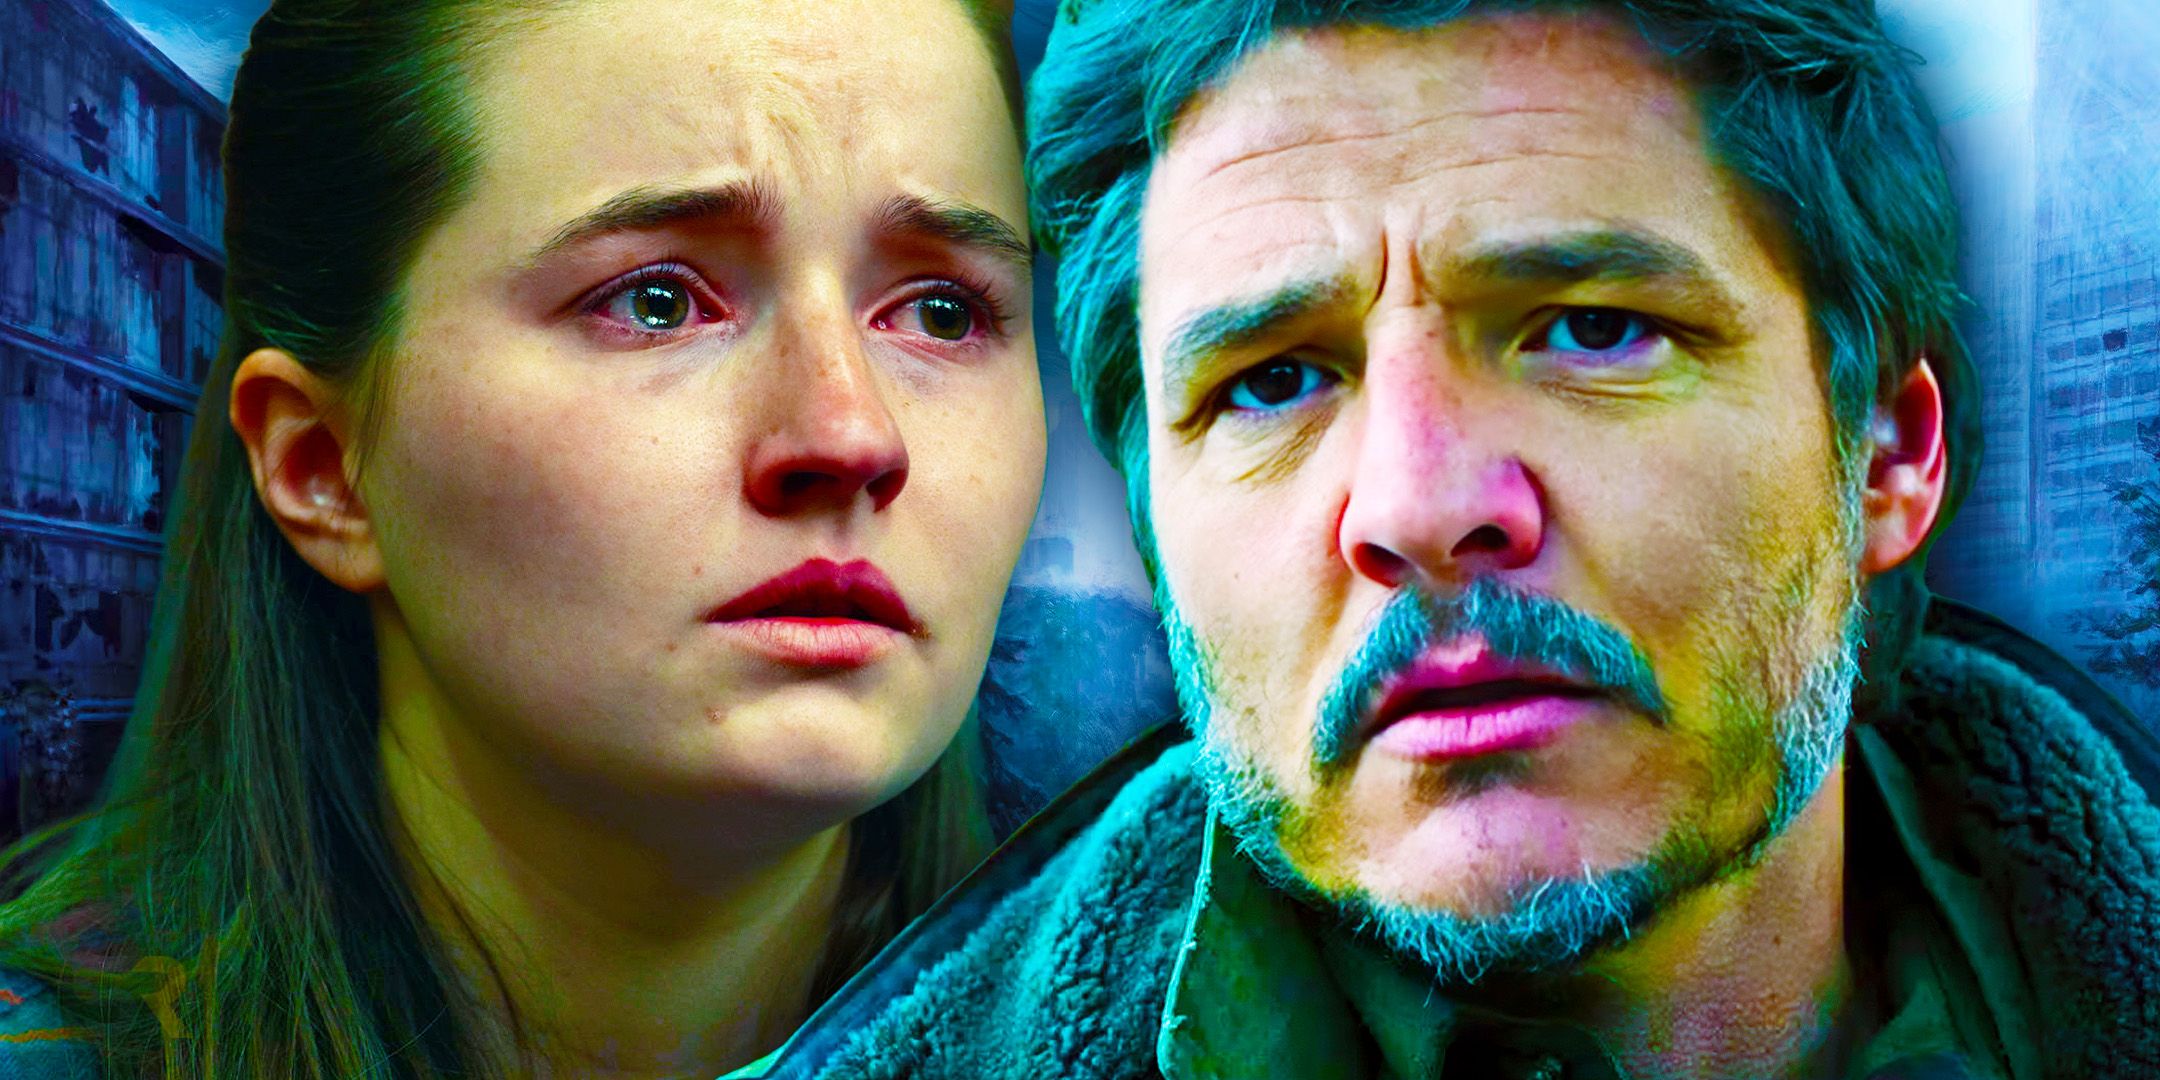 Kaitlyn Dever and Pedro Pascal who star as Abby and Joel in The Last of Us